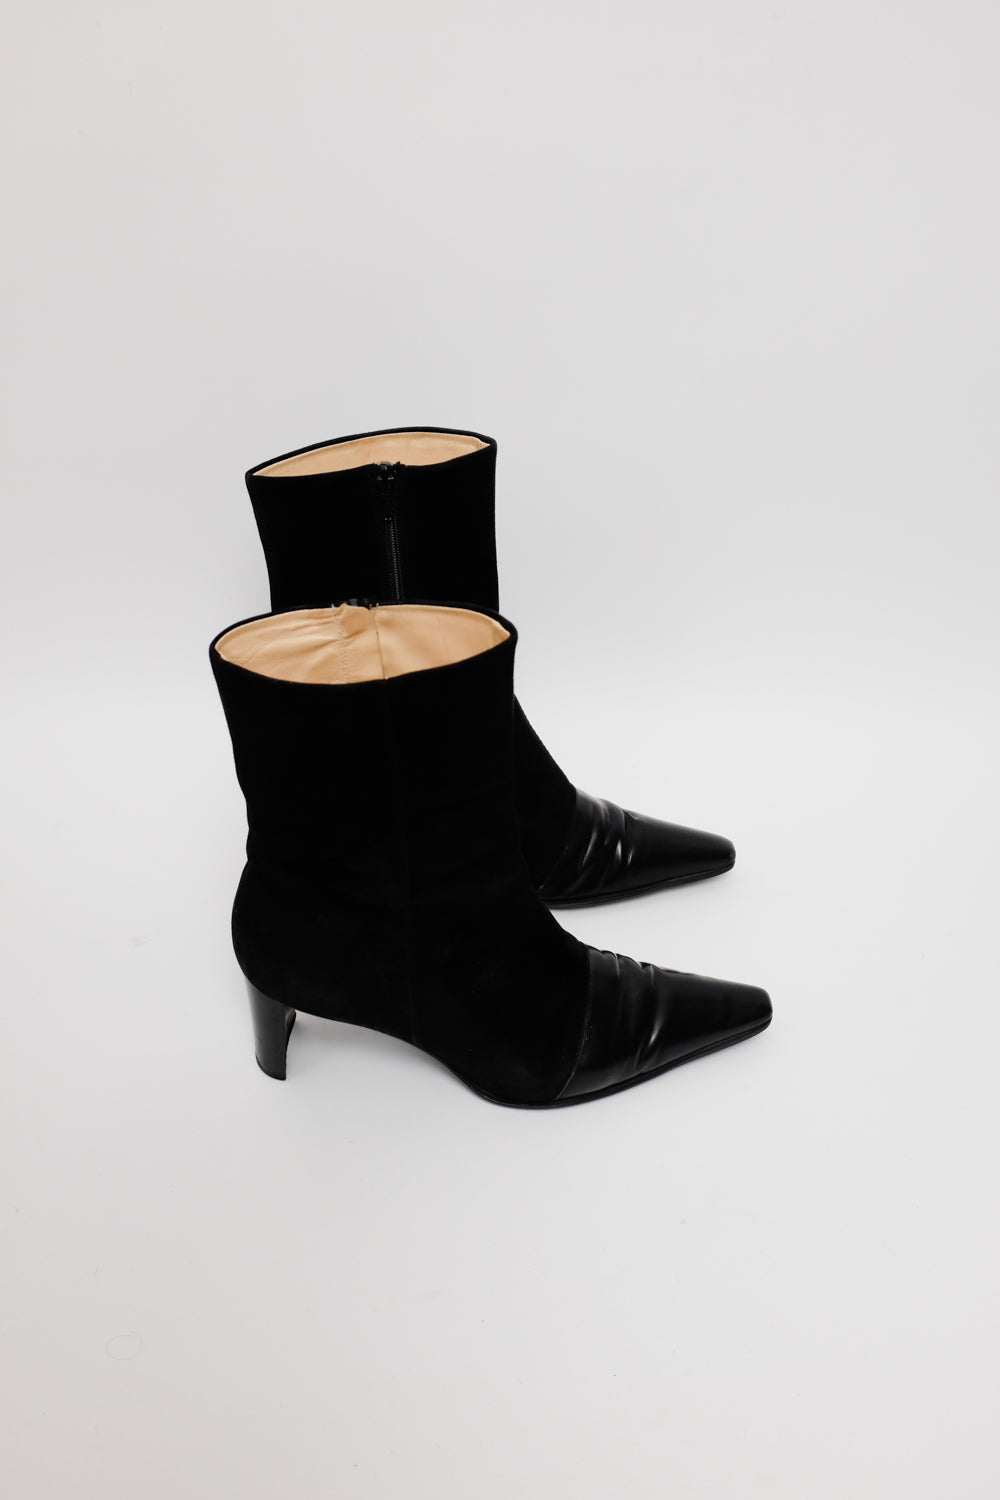 BLACK POINTY SUEDE LEATHER BOOTS 40